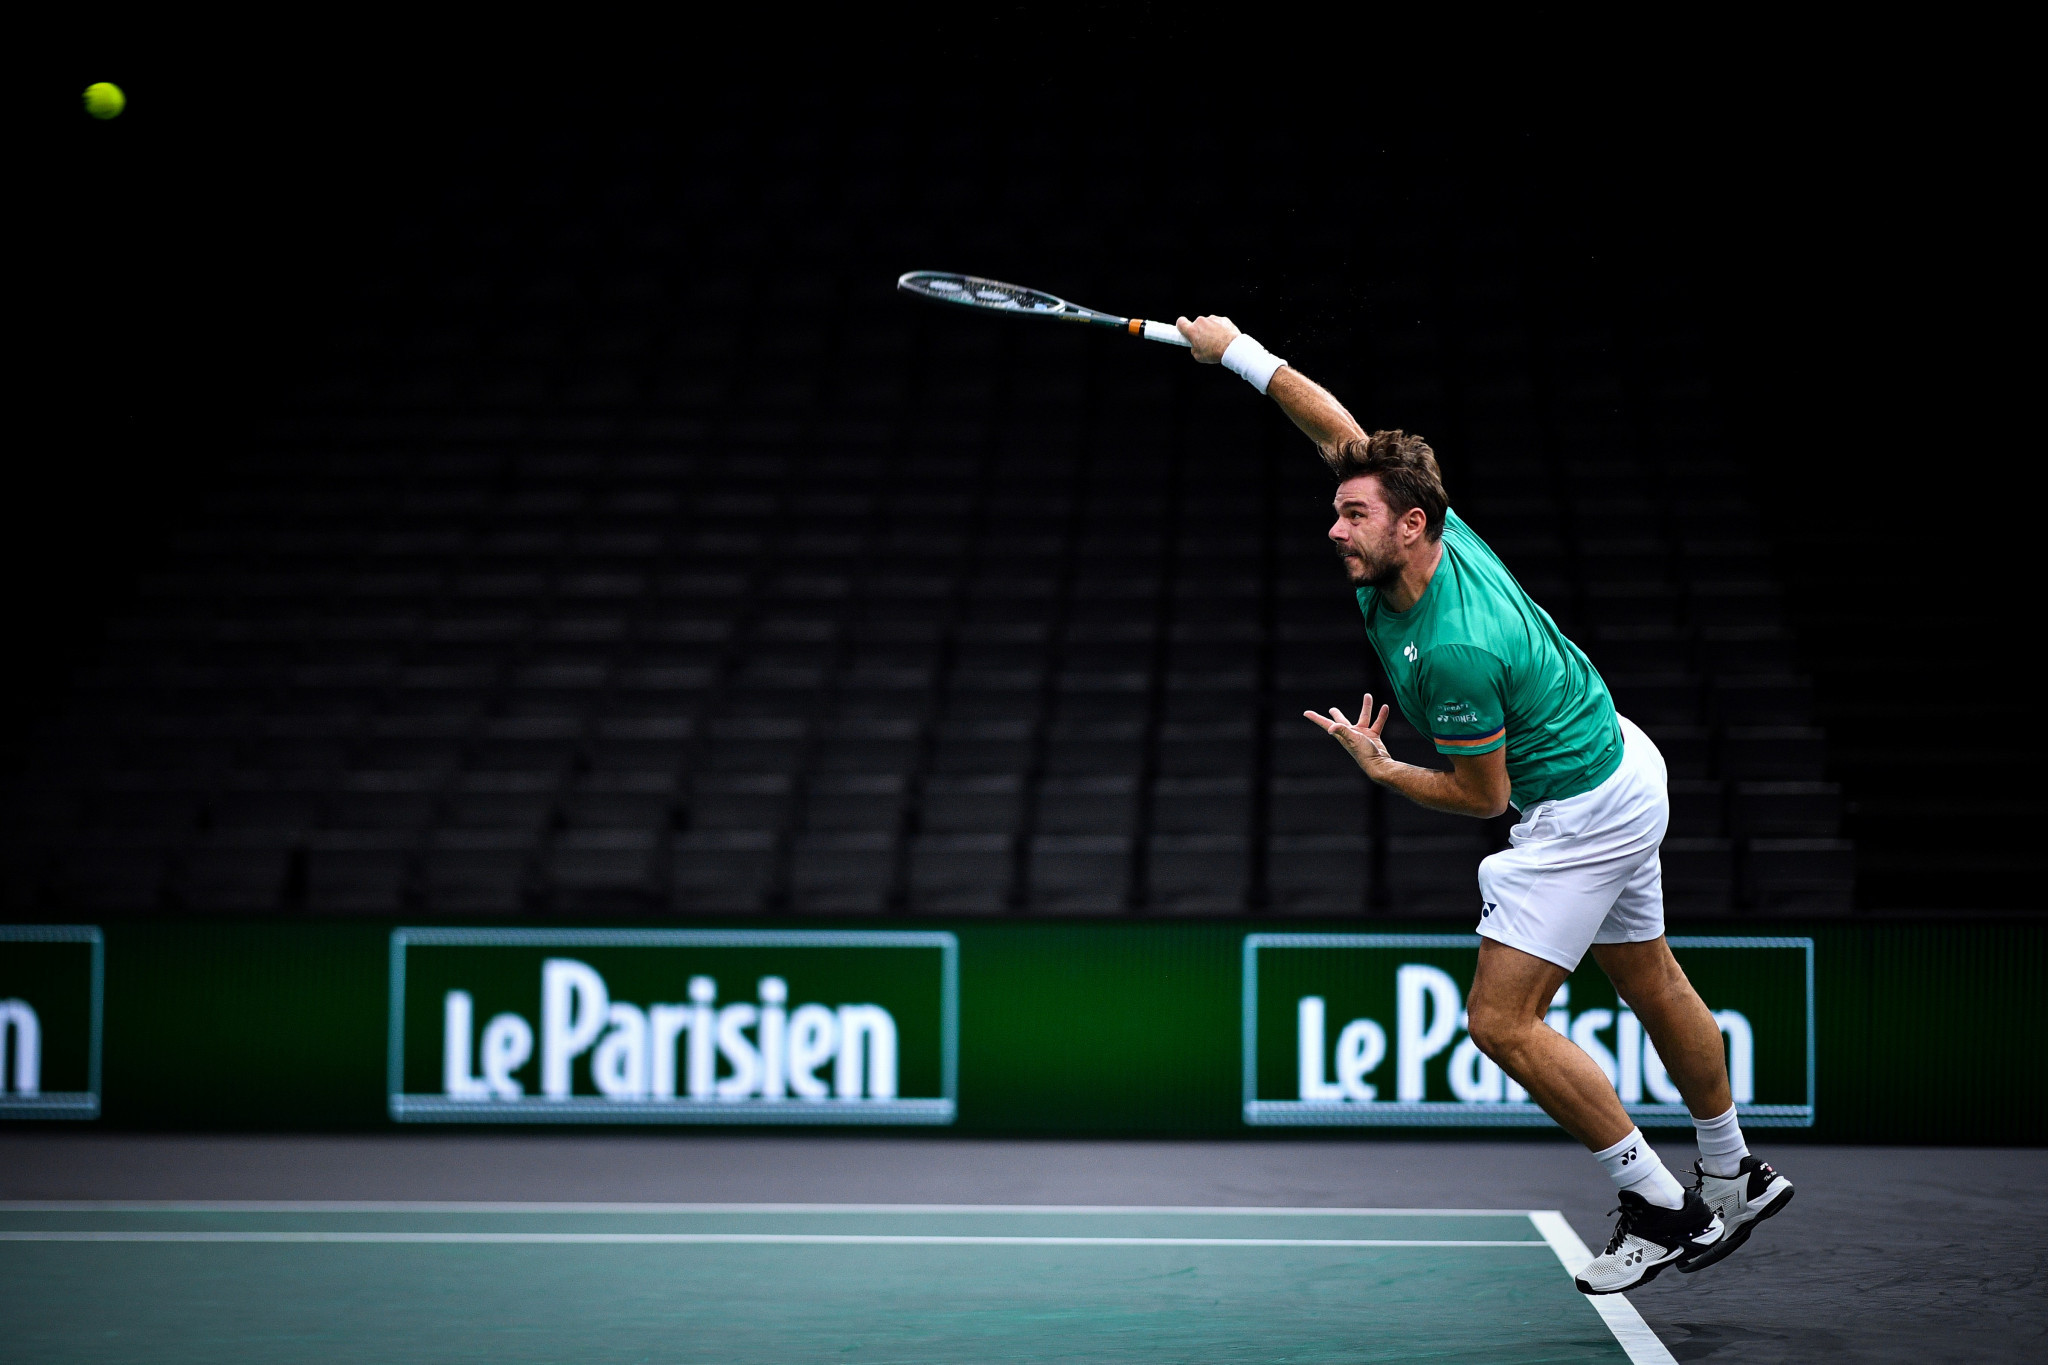 Stan Wawrinka hit eight aces in reaching round two of the Paris Masters ©Getty Images